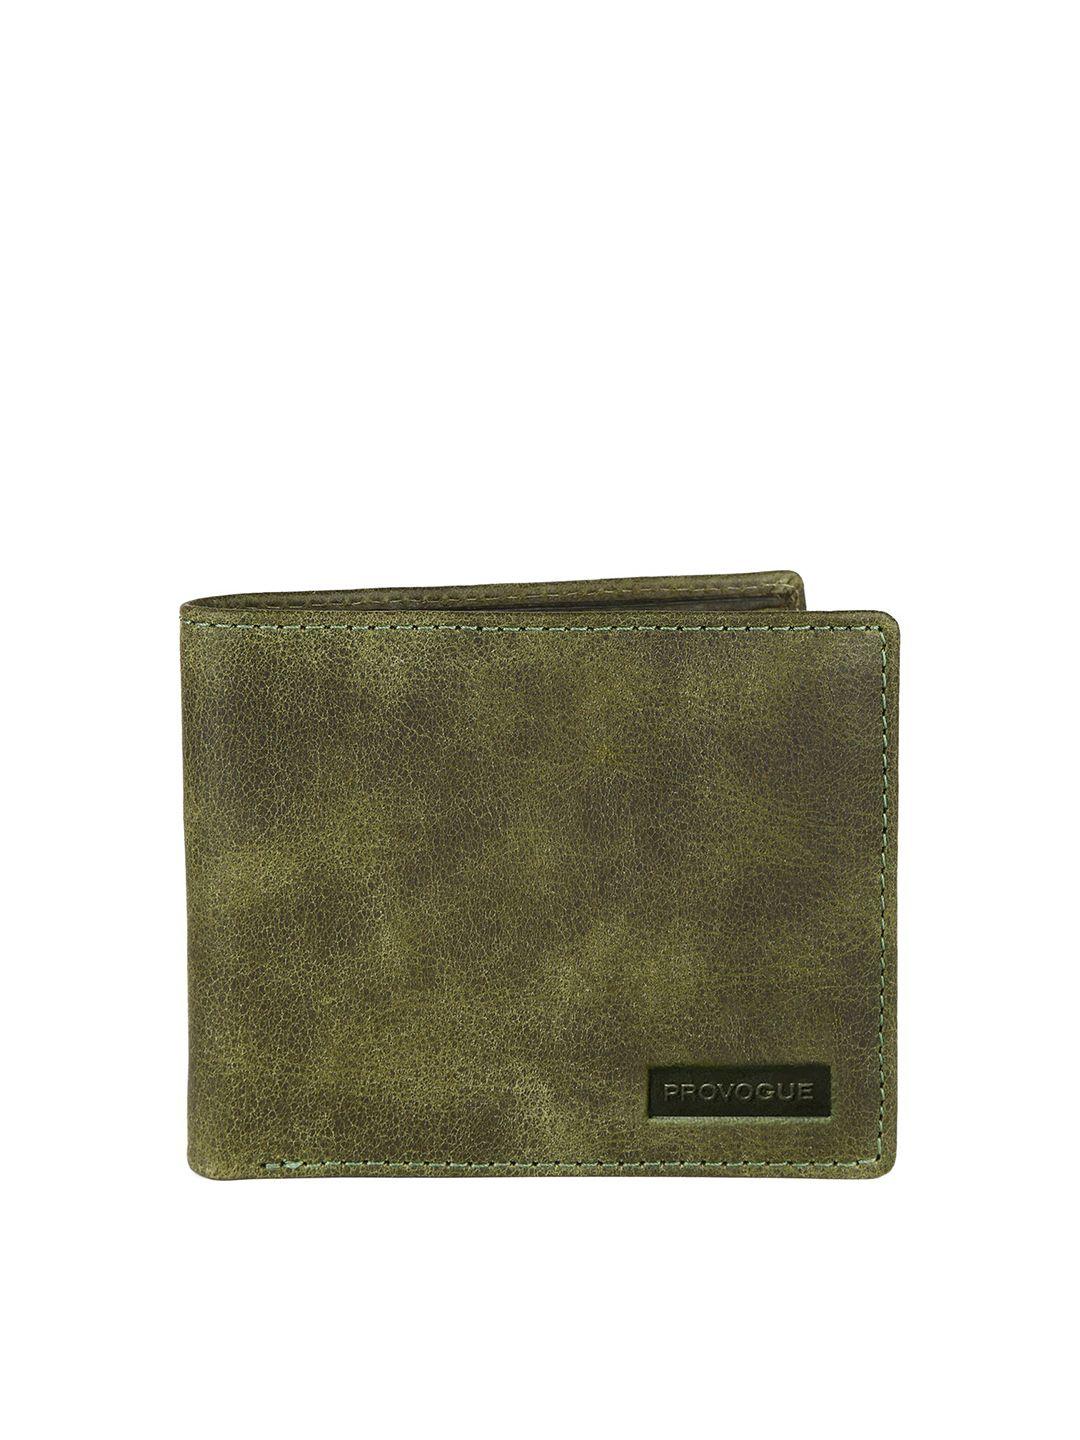 provogue men green textured leather two fold wallet